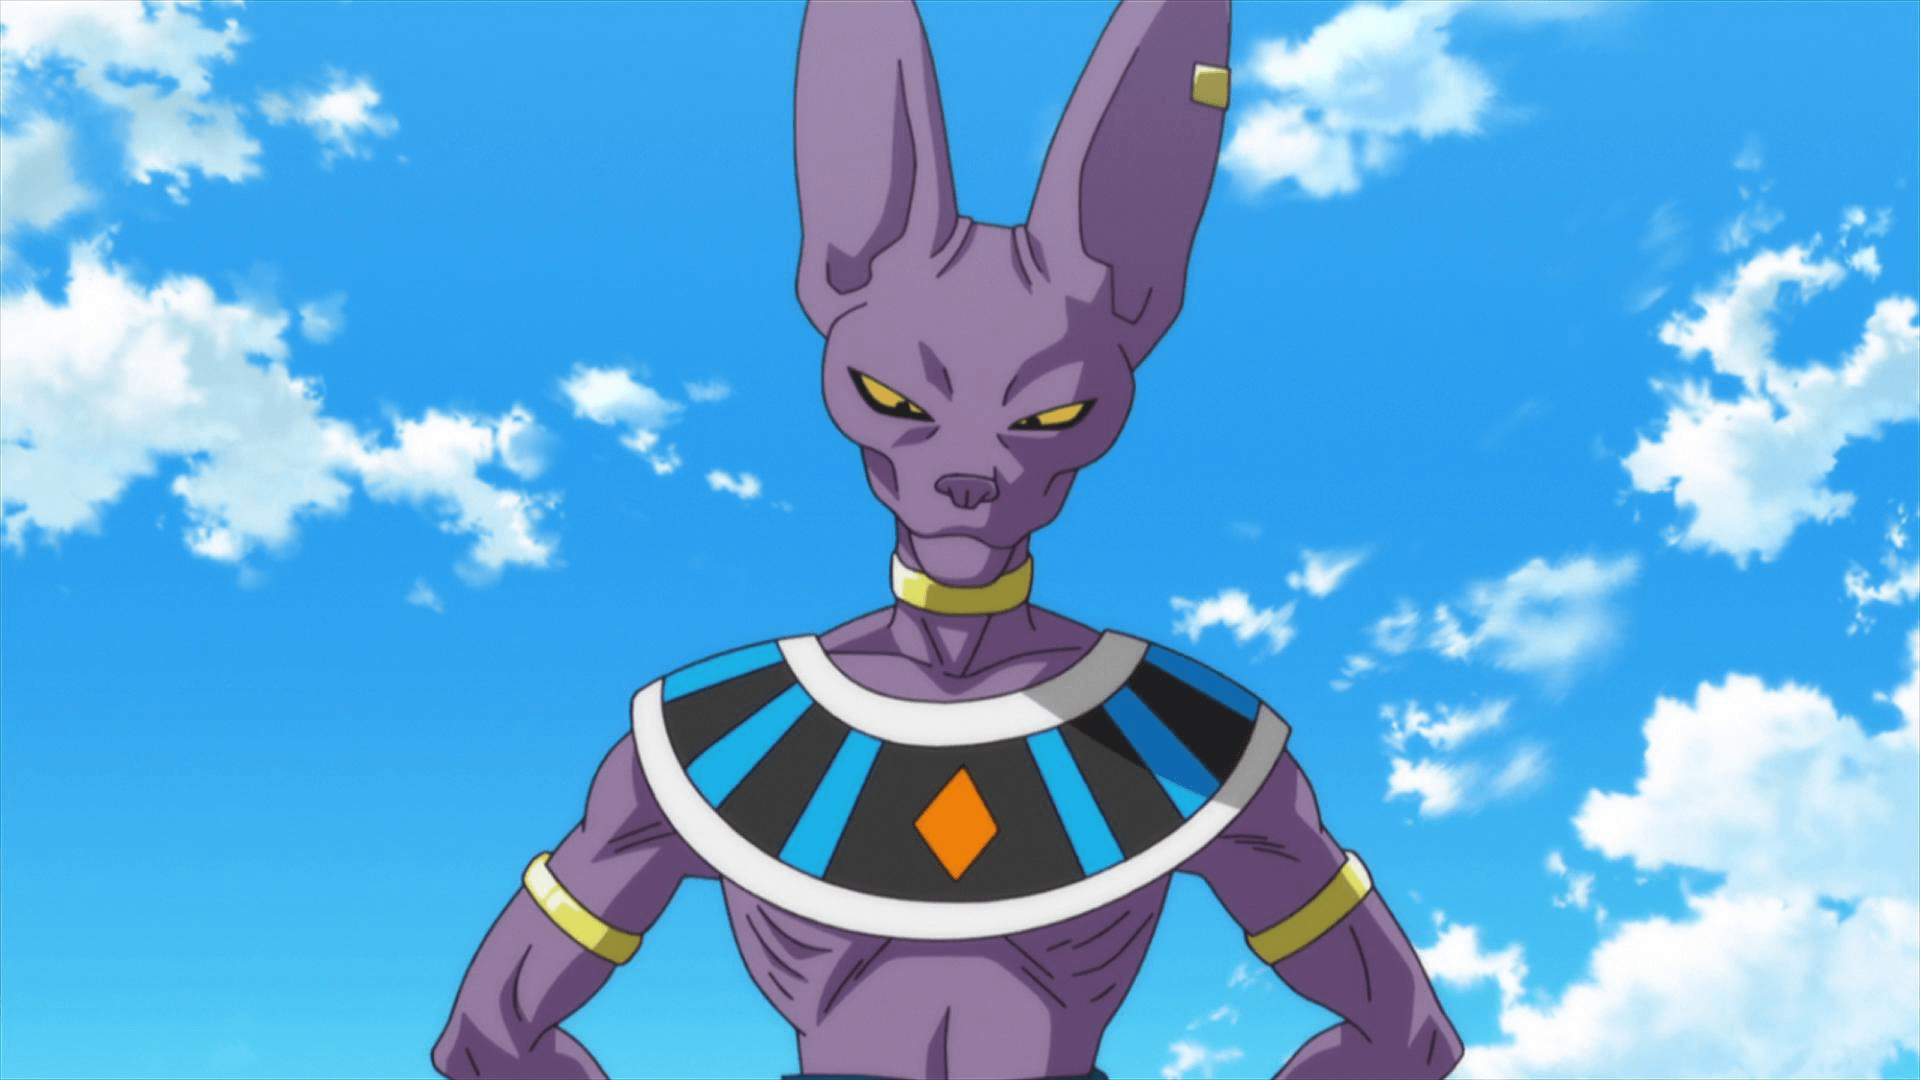 Lord Beerus Wallpapers Wallpaper Cave